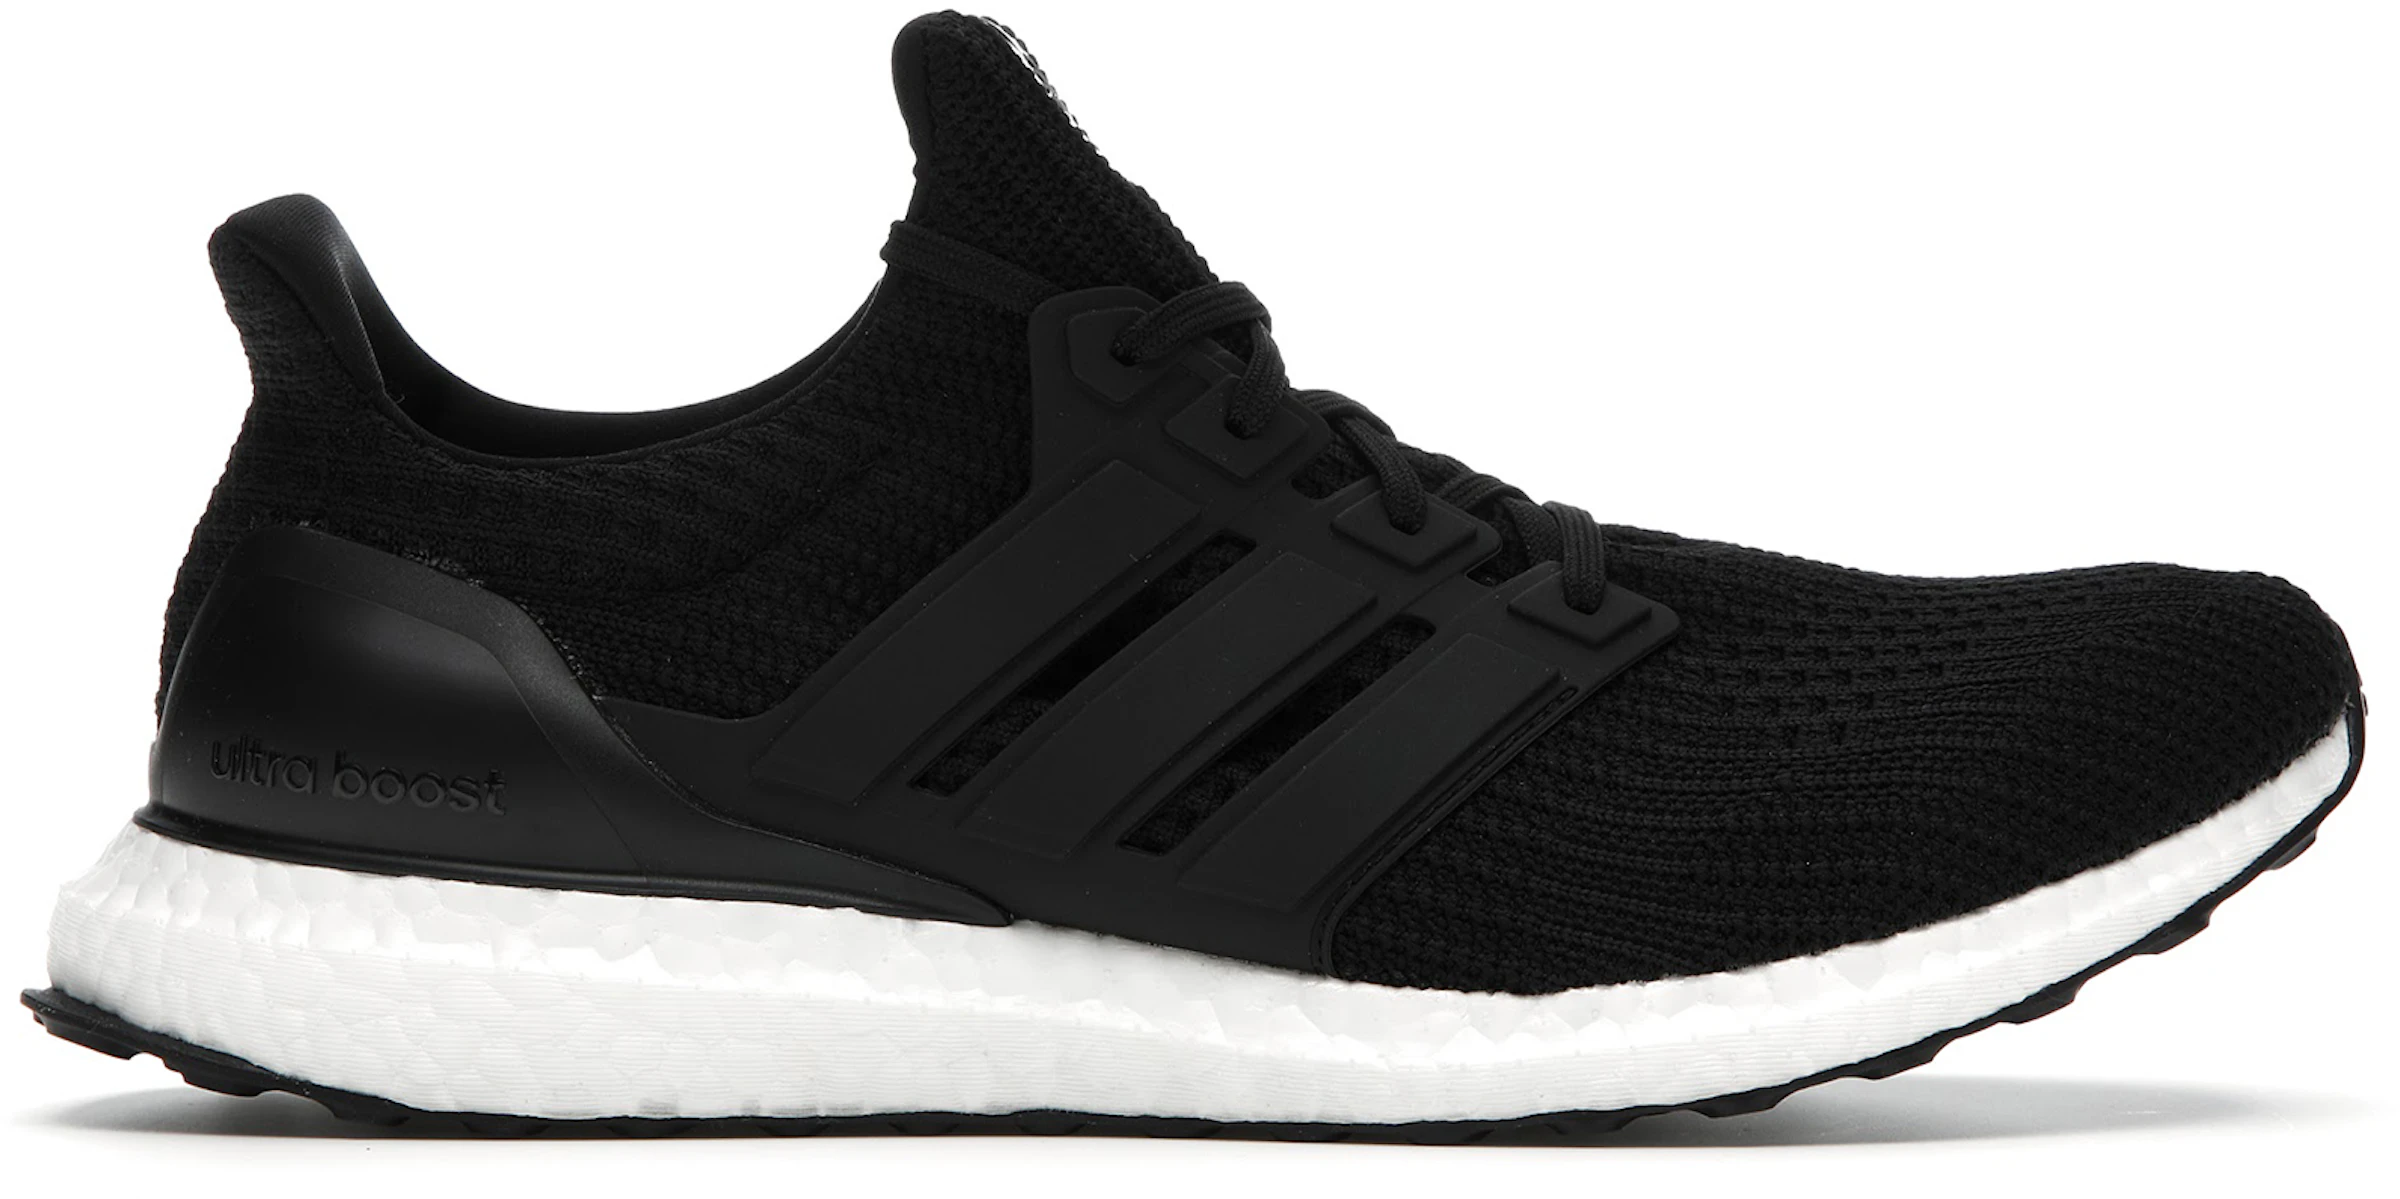 adidas Ultra Boost DNA 4.0 - FY9318 - US